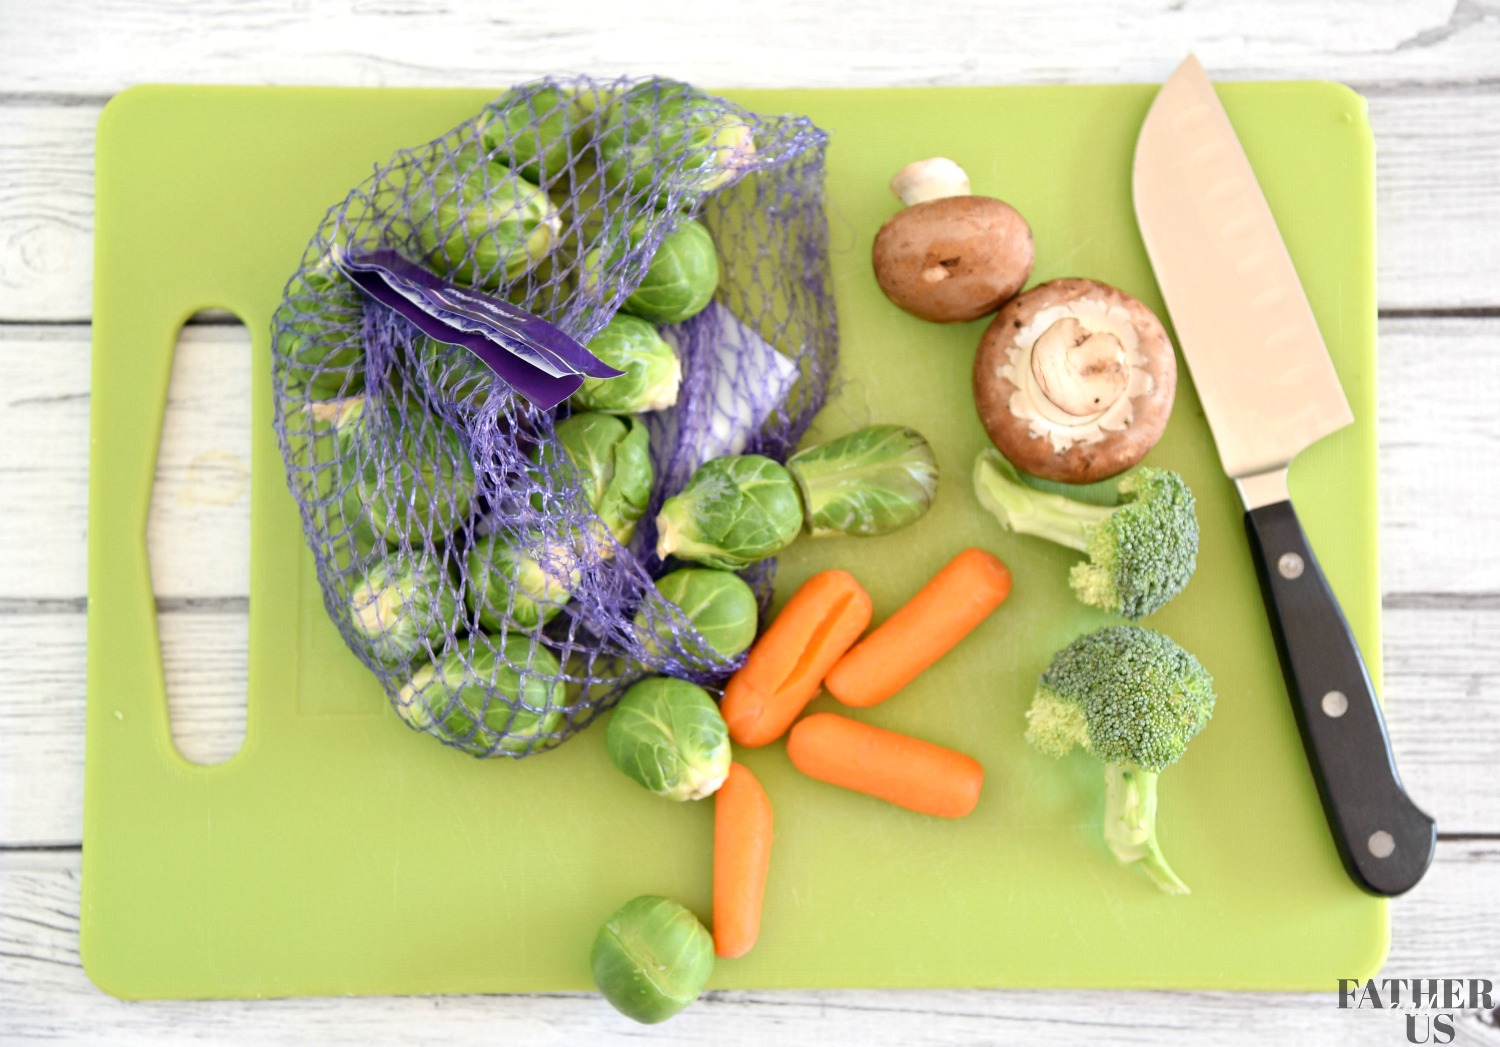 This Air Fryer Vegetable Recipe includes chopping up the vegetables on a cutting board.